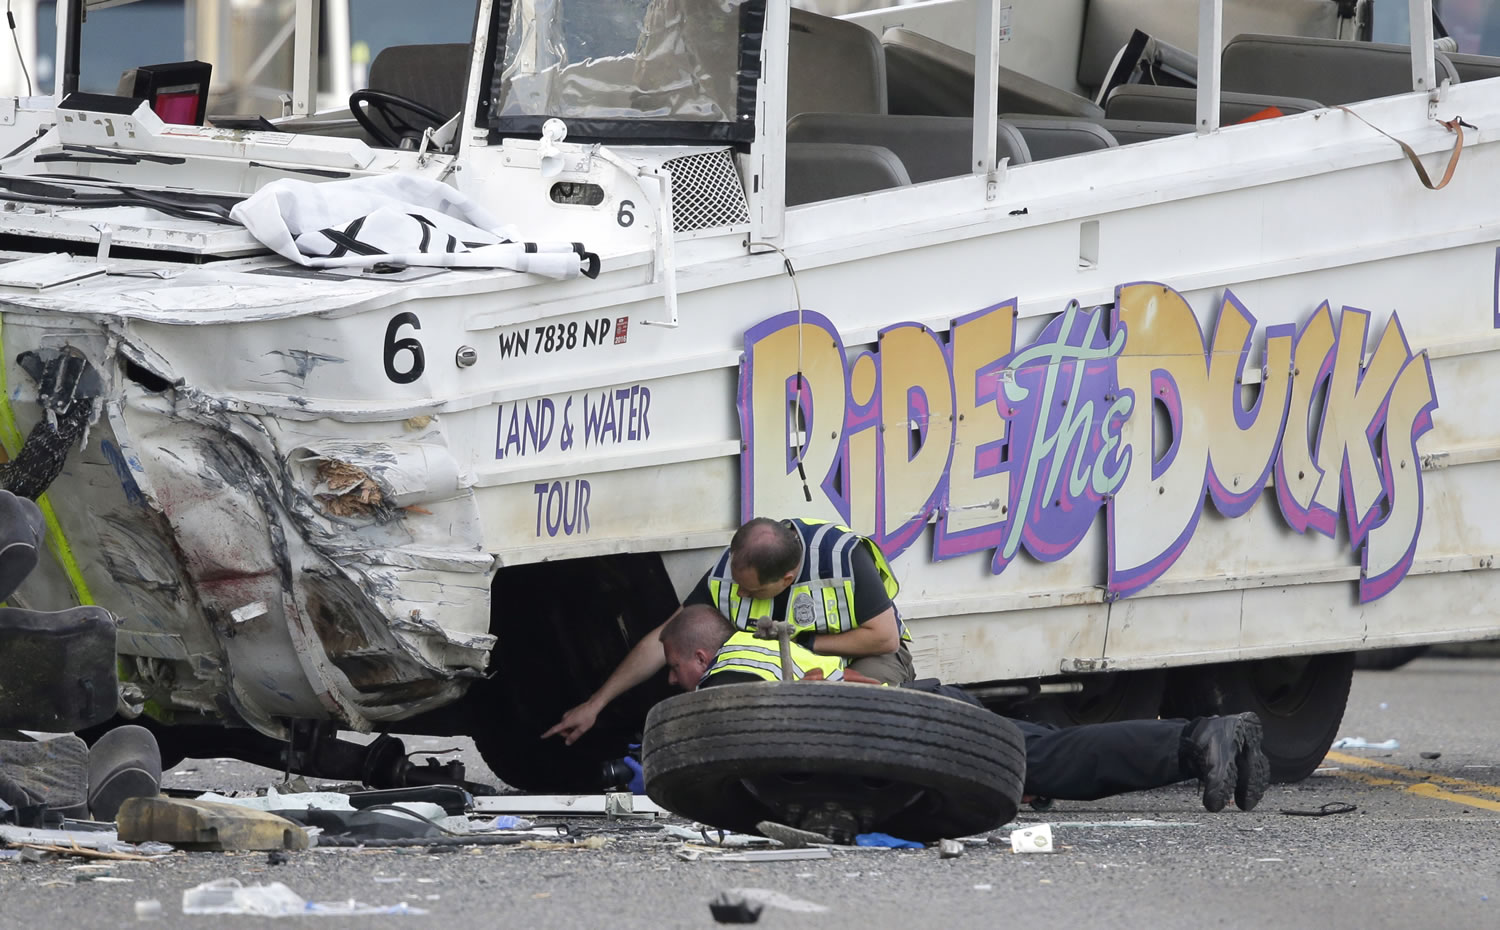 Seattle Police officers look under a &quot;Ride the Ducks&quot; tourist vehicle as a tire and wheel from the bus sits nearby before the bus is loaded onto a flatbed tow truck Thursday, Sept. 24, 2015, after it was involved in a fatal crash with a charter passenger bus earlier in the day in Seattle. (AP Photo/Ted S.